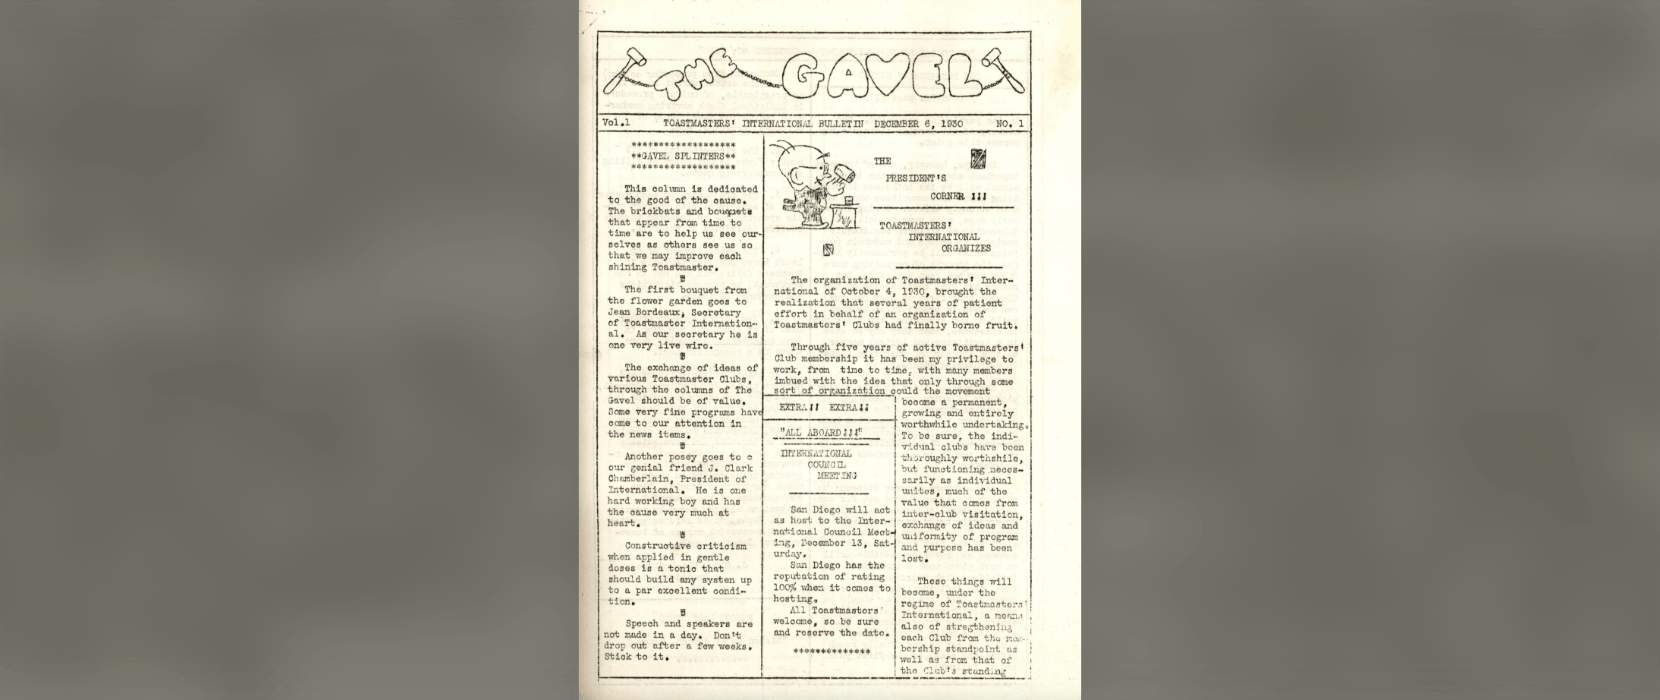 Historical newsletter The Gavel with typed copy and illustration